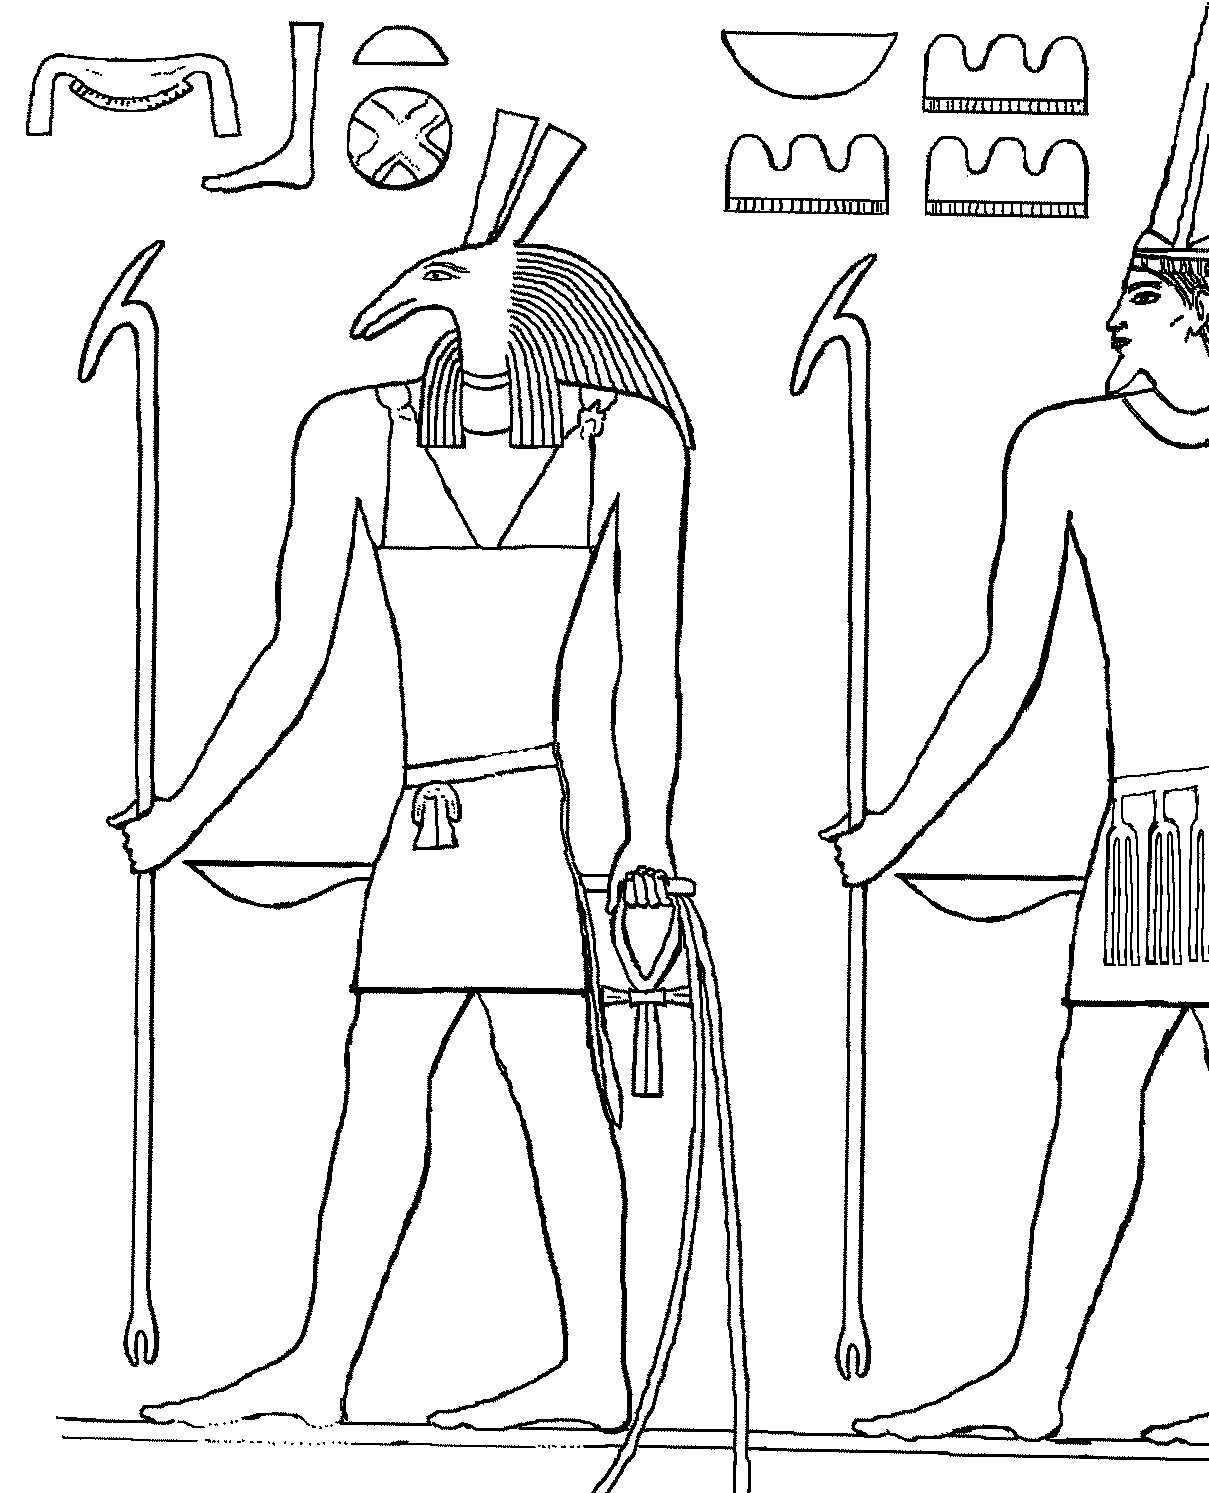 Coloring page: Egyptian Mythology (Gods and Goddesses) #111254 - Printable coloring pages